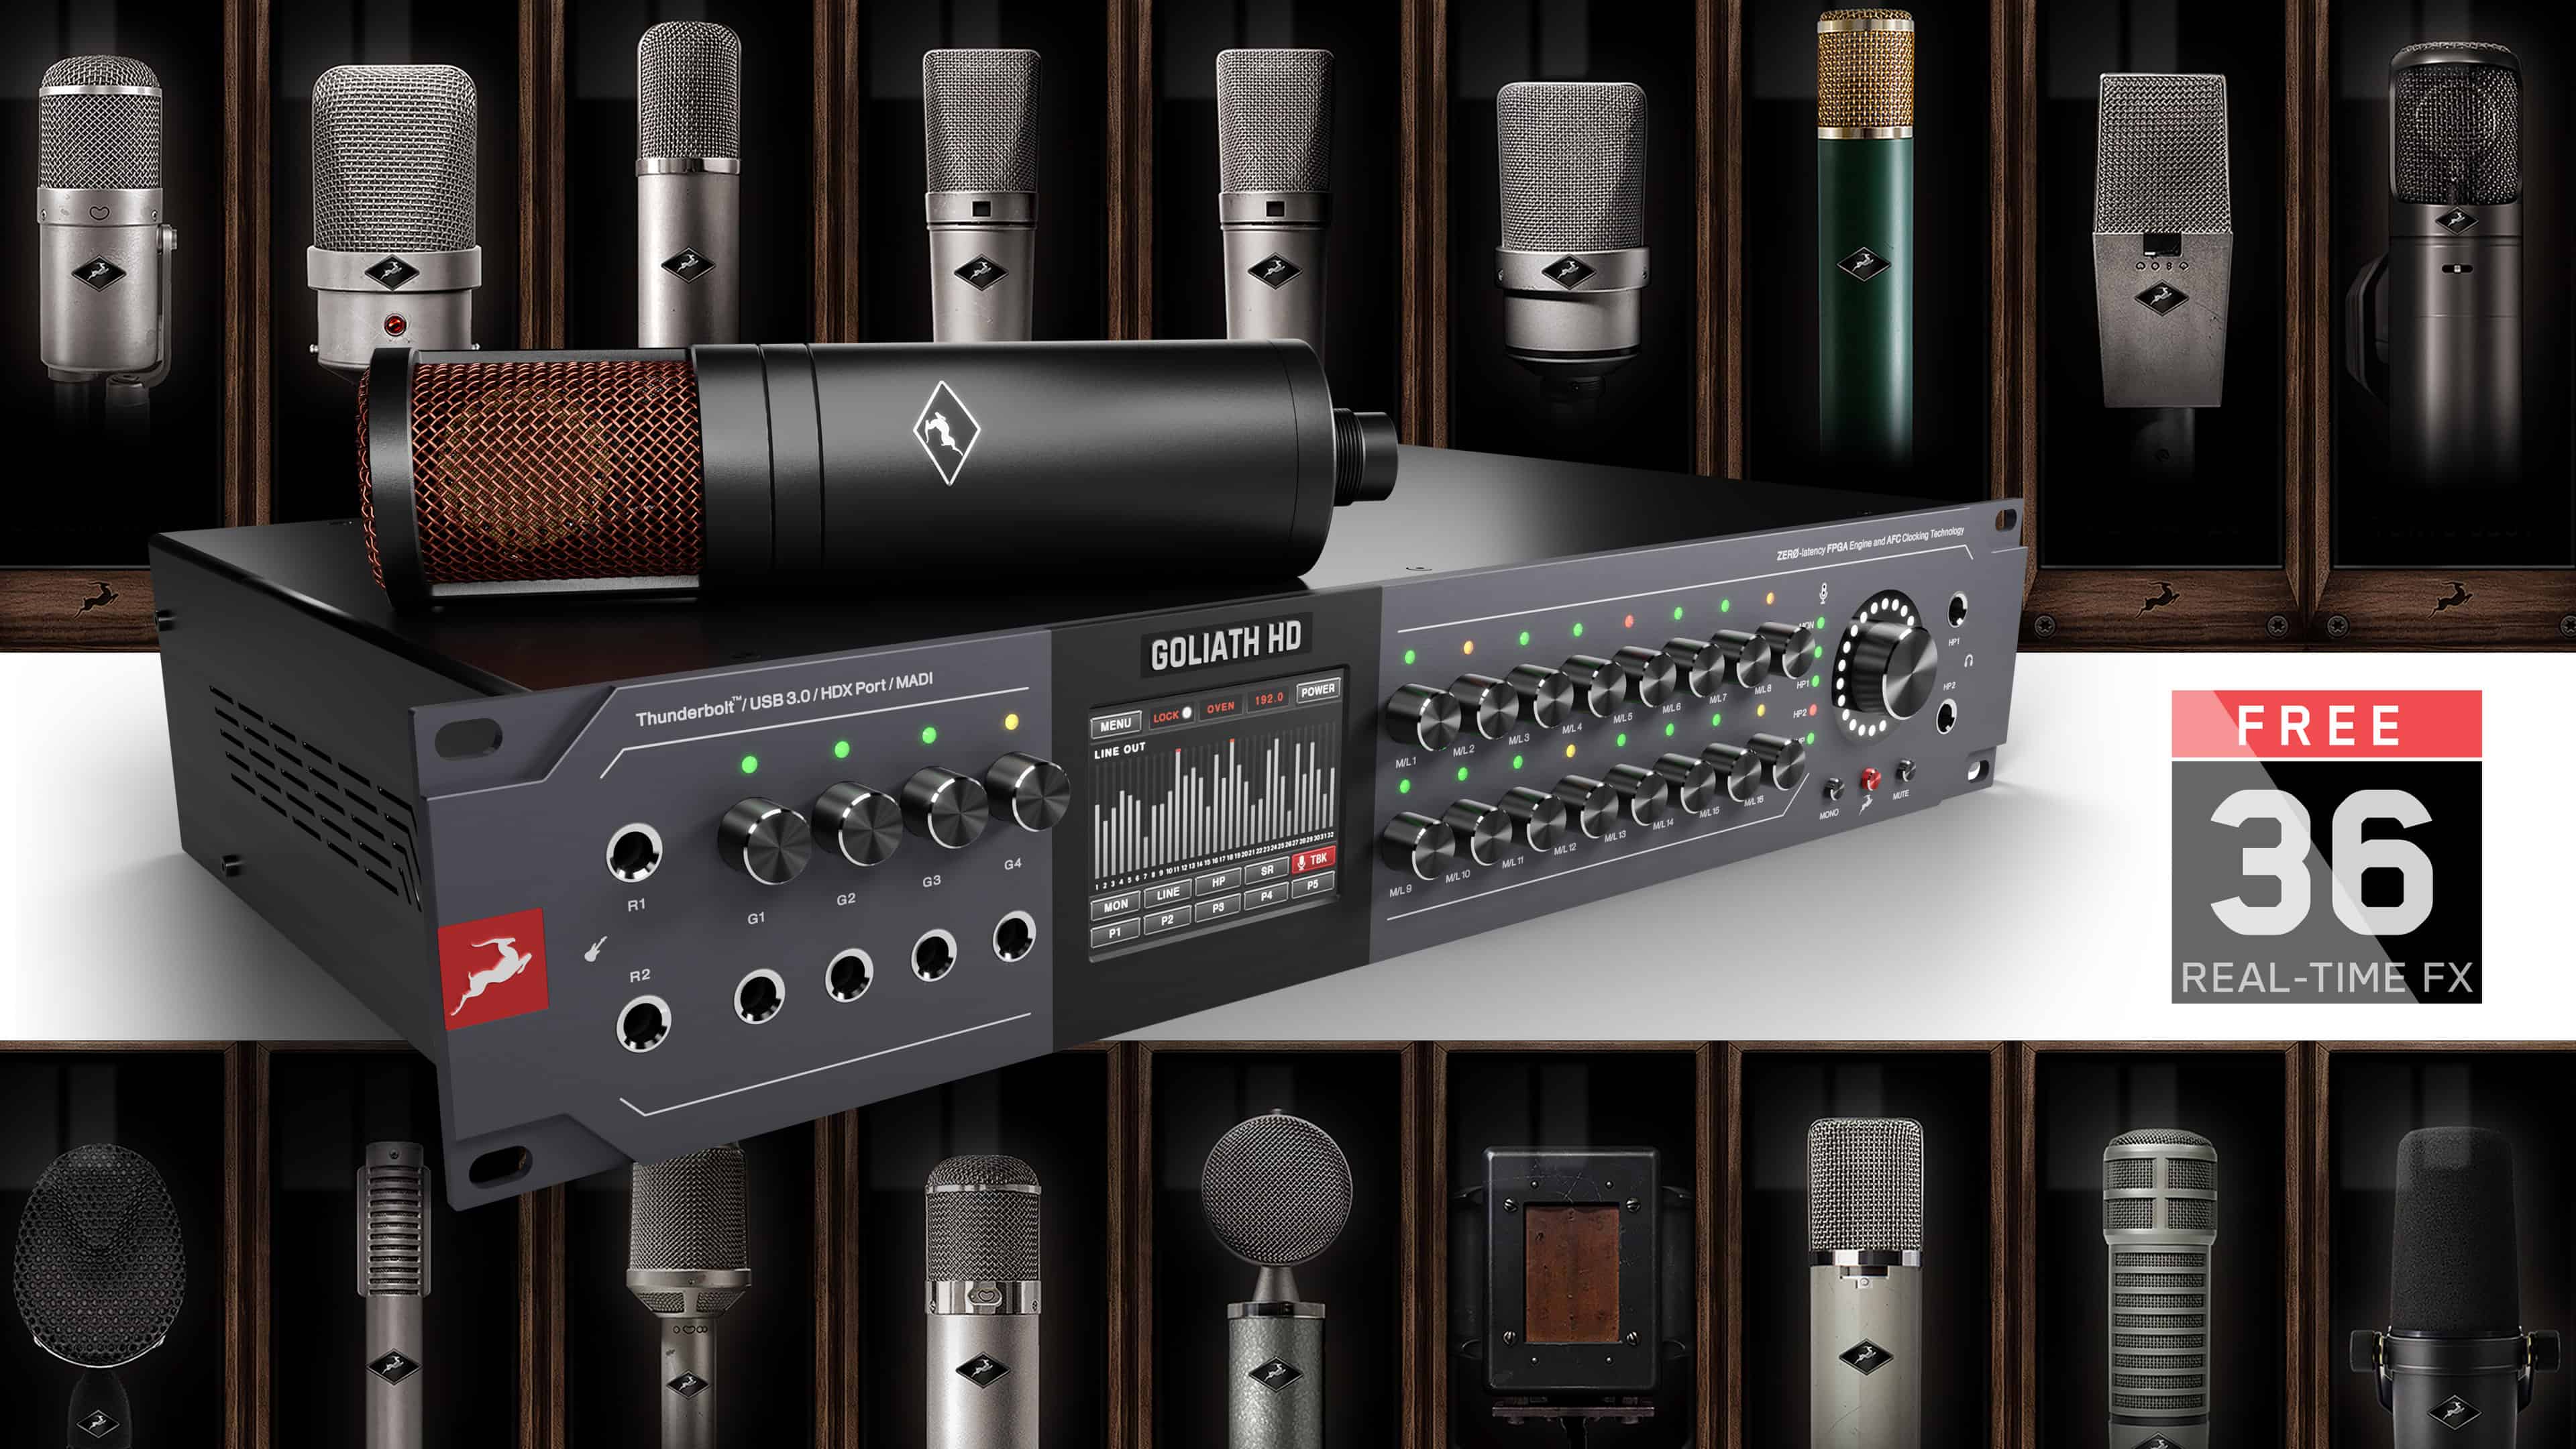 Goliath HD | Gen 3 a 64-CHANNEL Thunderbolt™ / USB / HDX Audio Interface by Antelope Audio